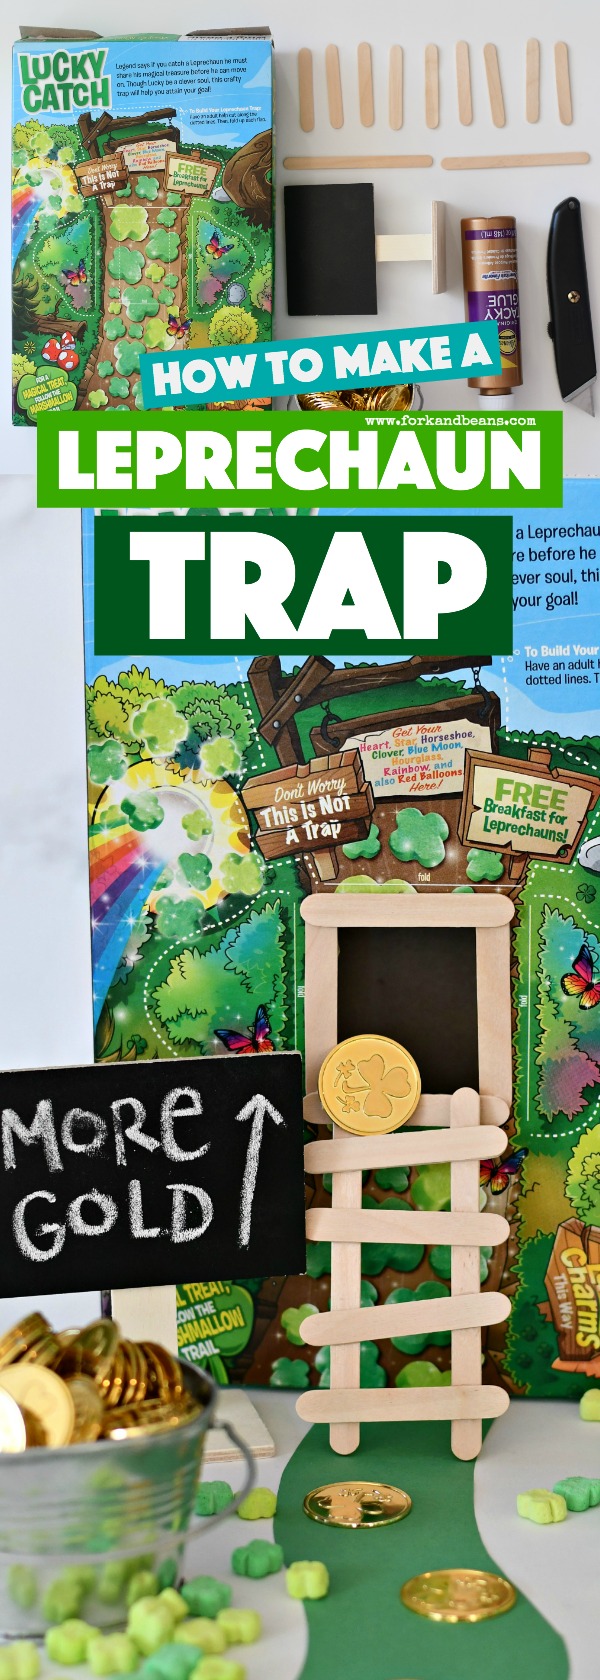 A DIY leprechaun trap made from a cereal box with a popsicle stick ladder